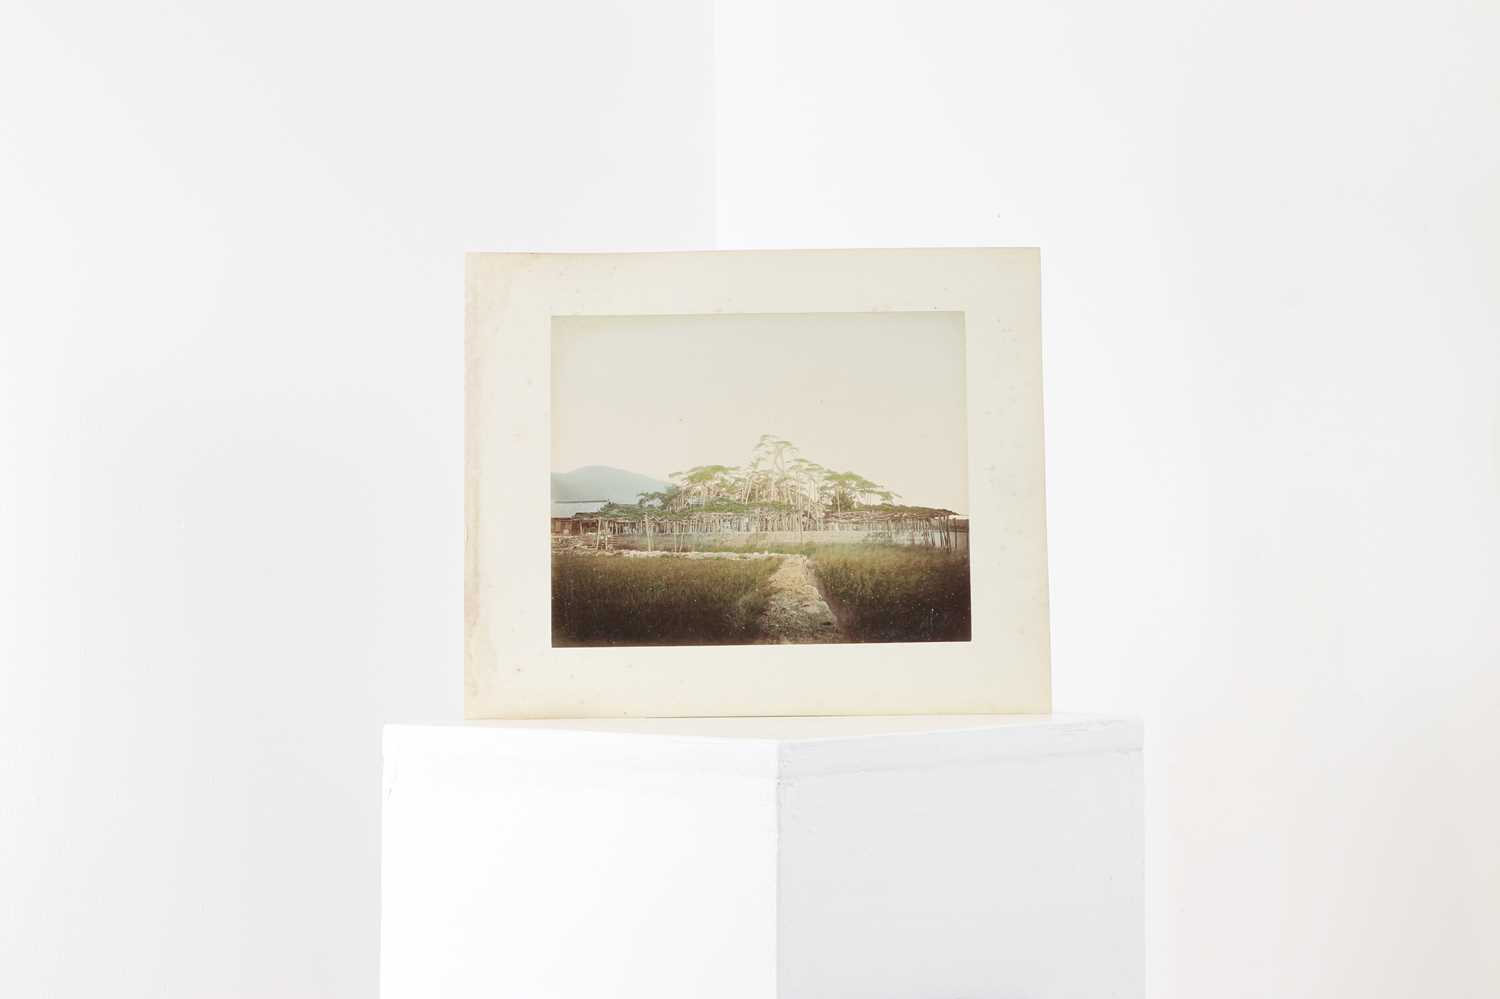 A lacquered photograph album, - Image 10 of 17